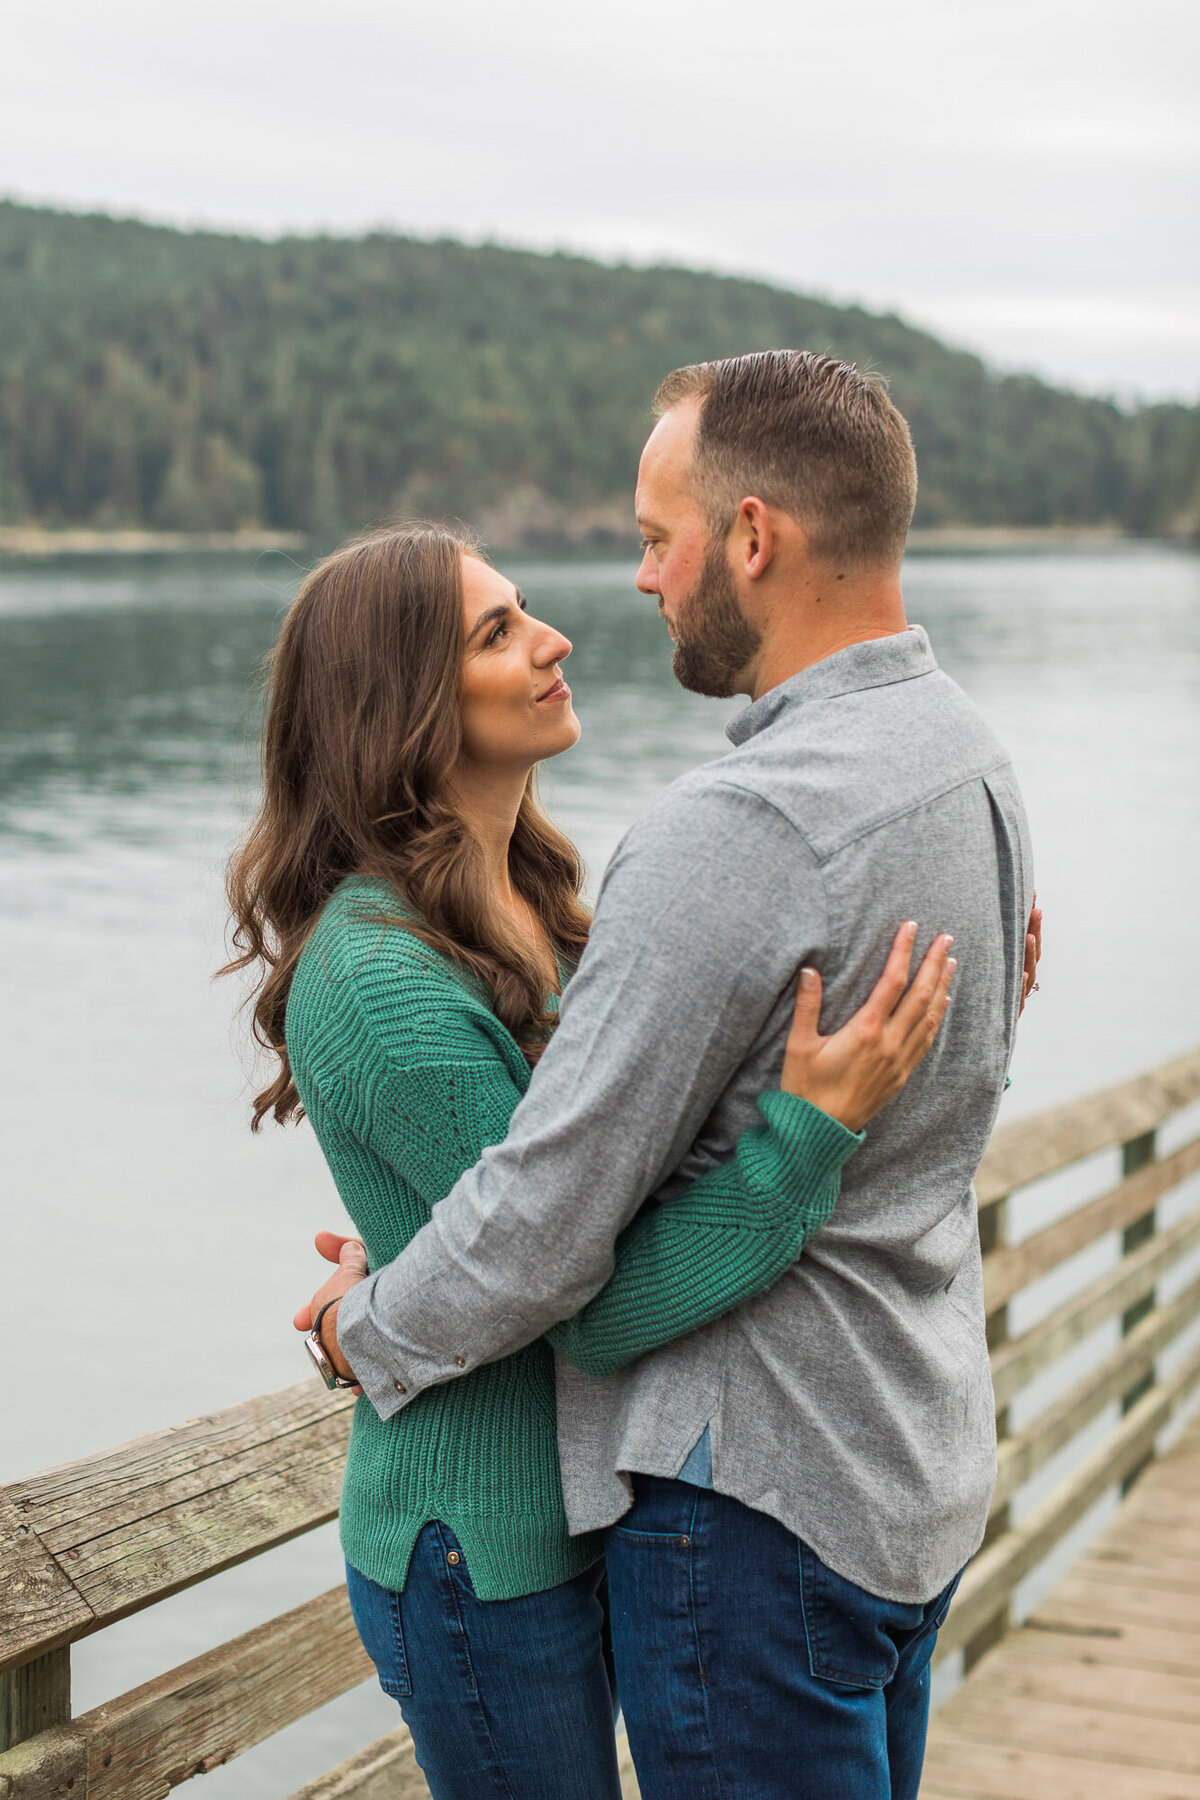 Beach engagement photos at Deception Pass near Seattle colorful fun photo by Joanna Monger Photography